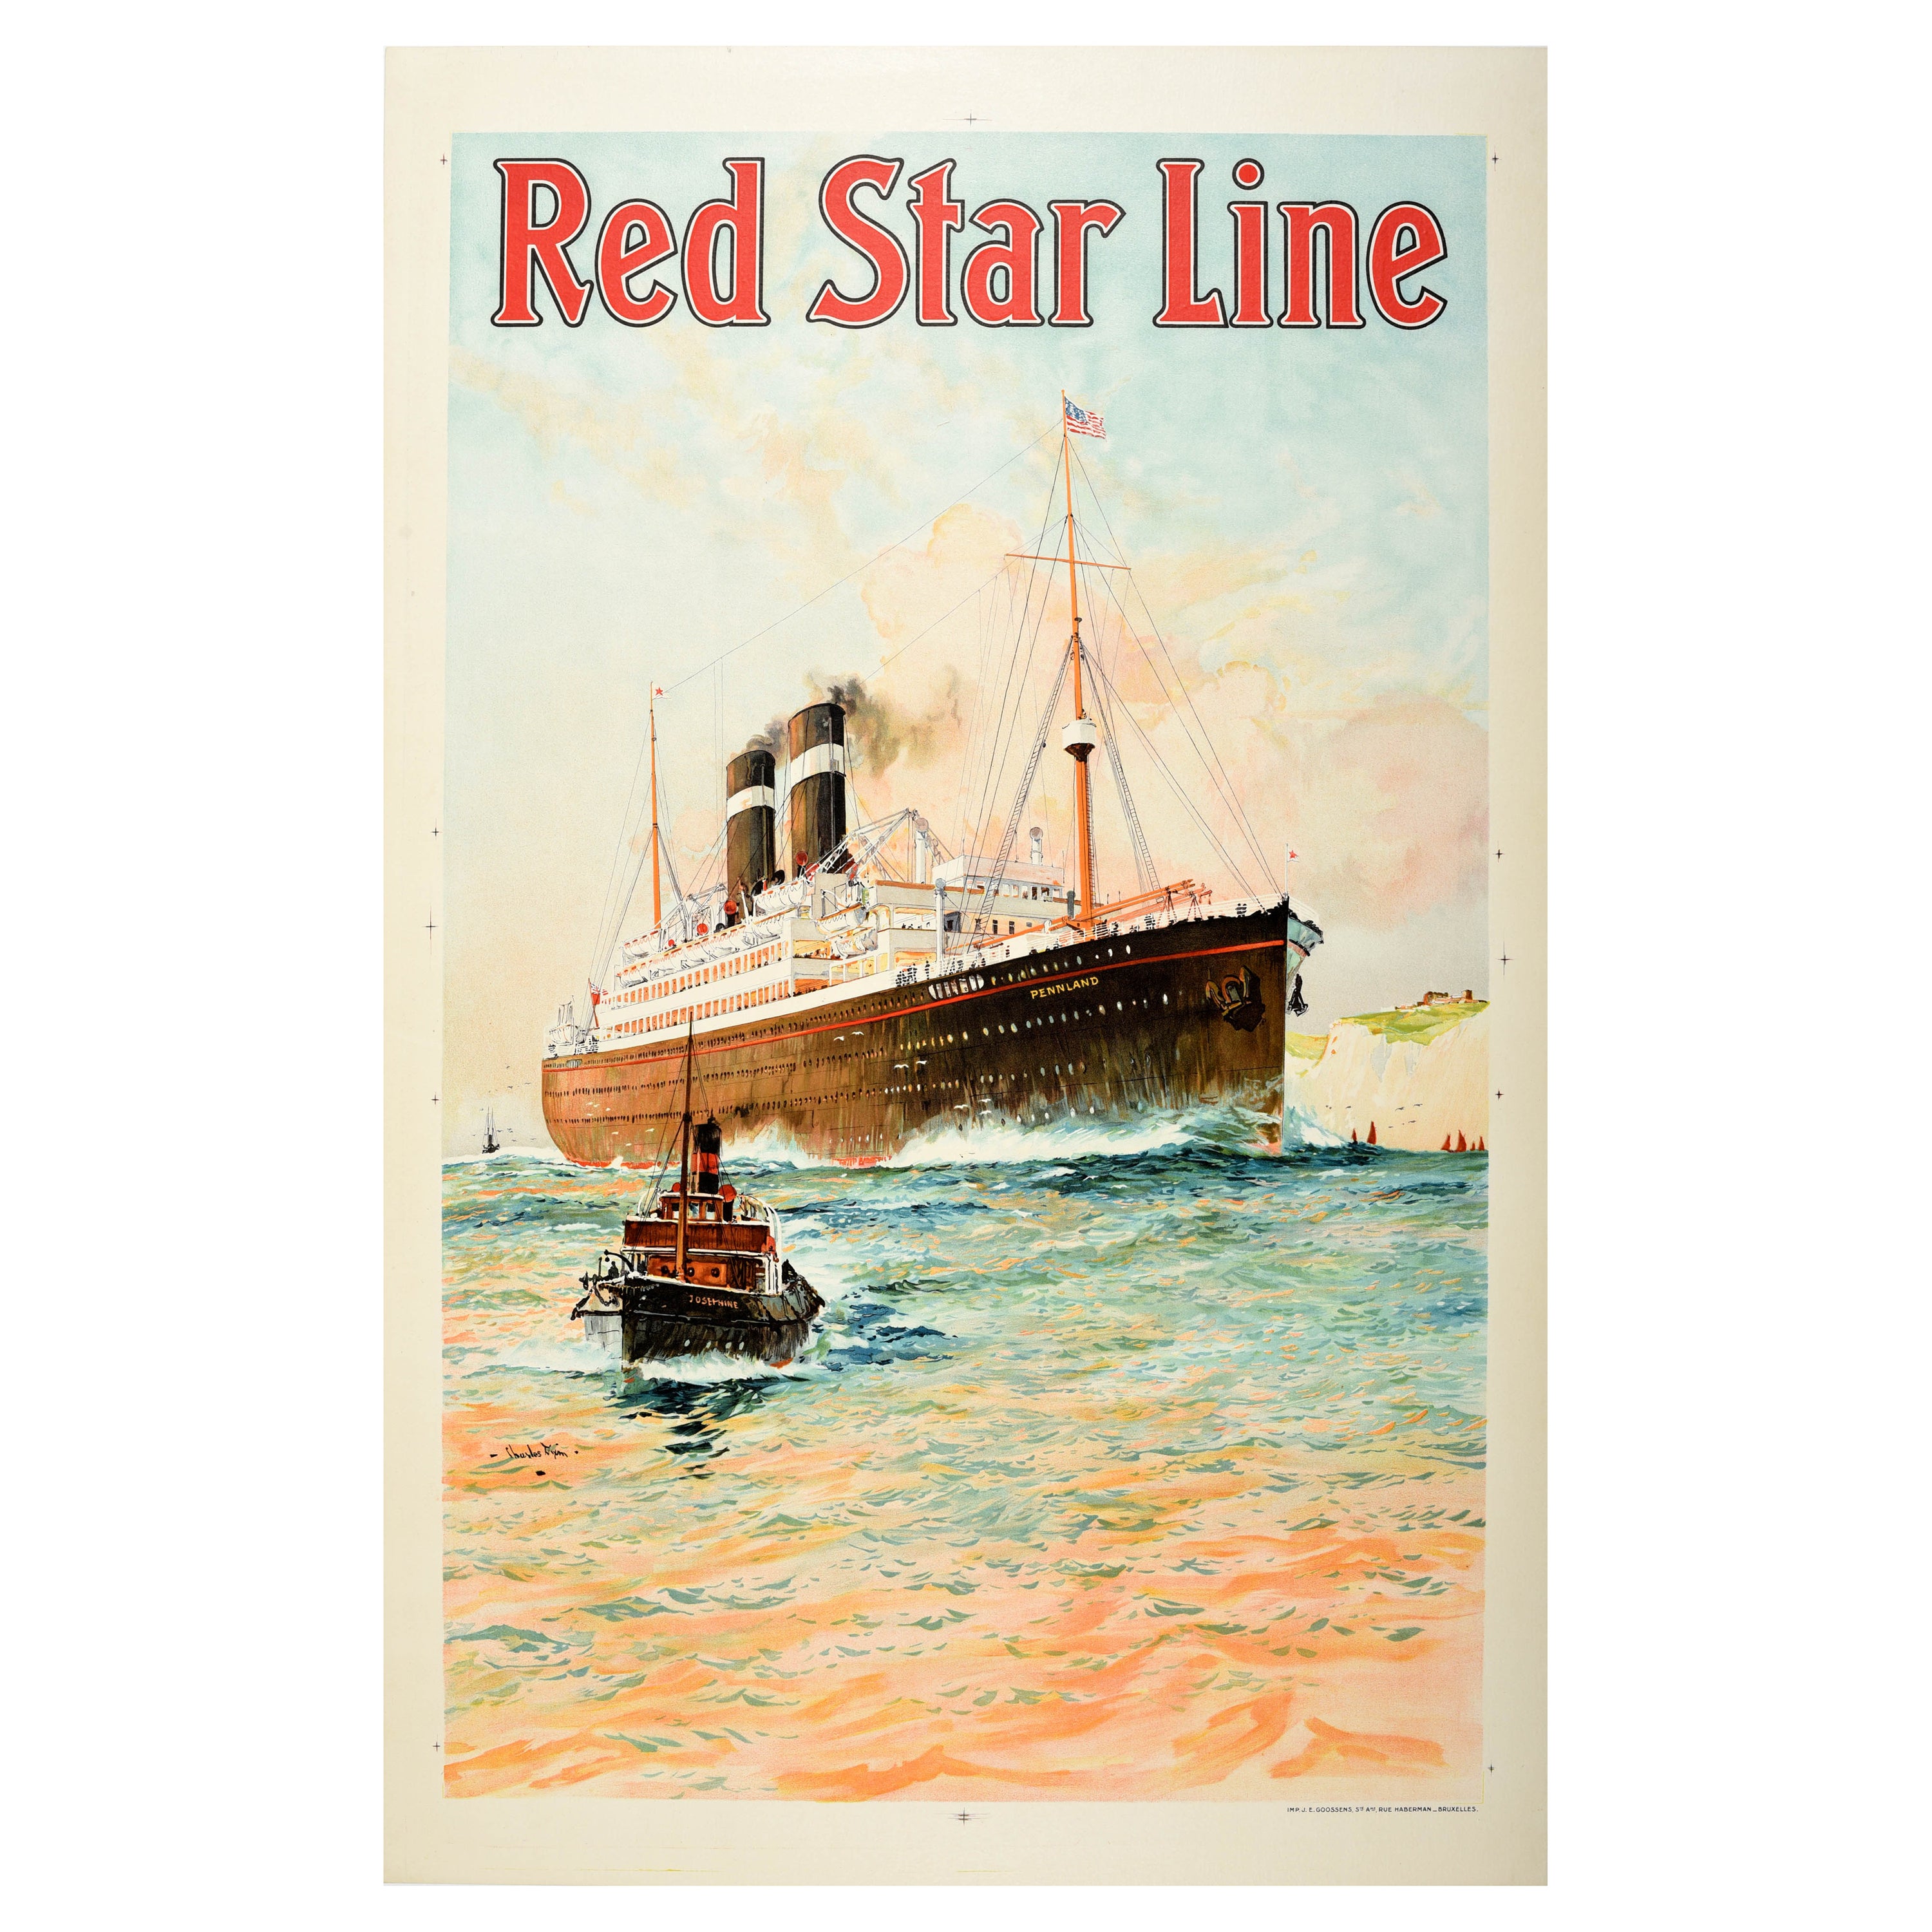 TX368 Vintage Cruises White Star Line Ship Liner Travel Poster Re-Print A2/A3/A4 